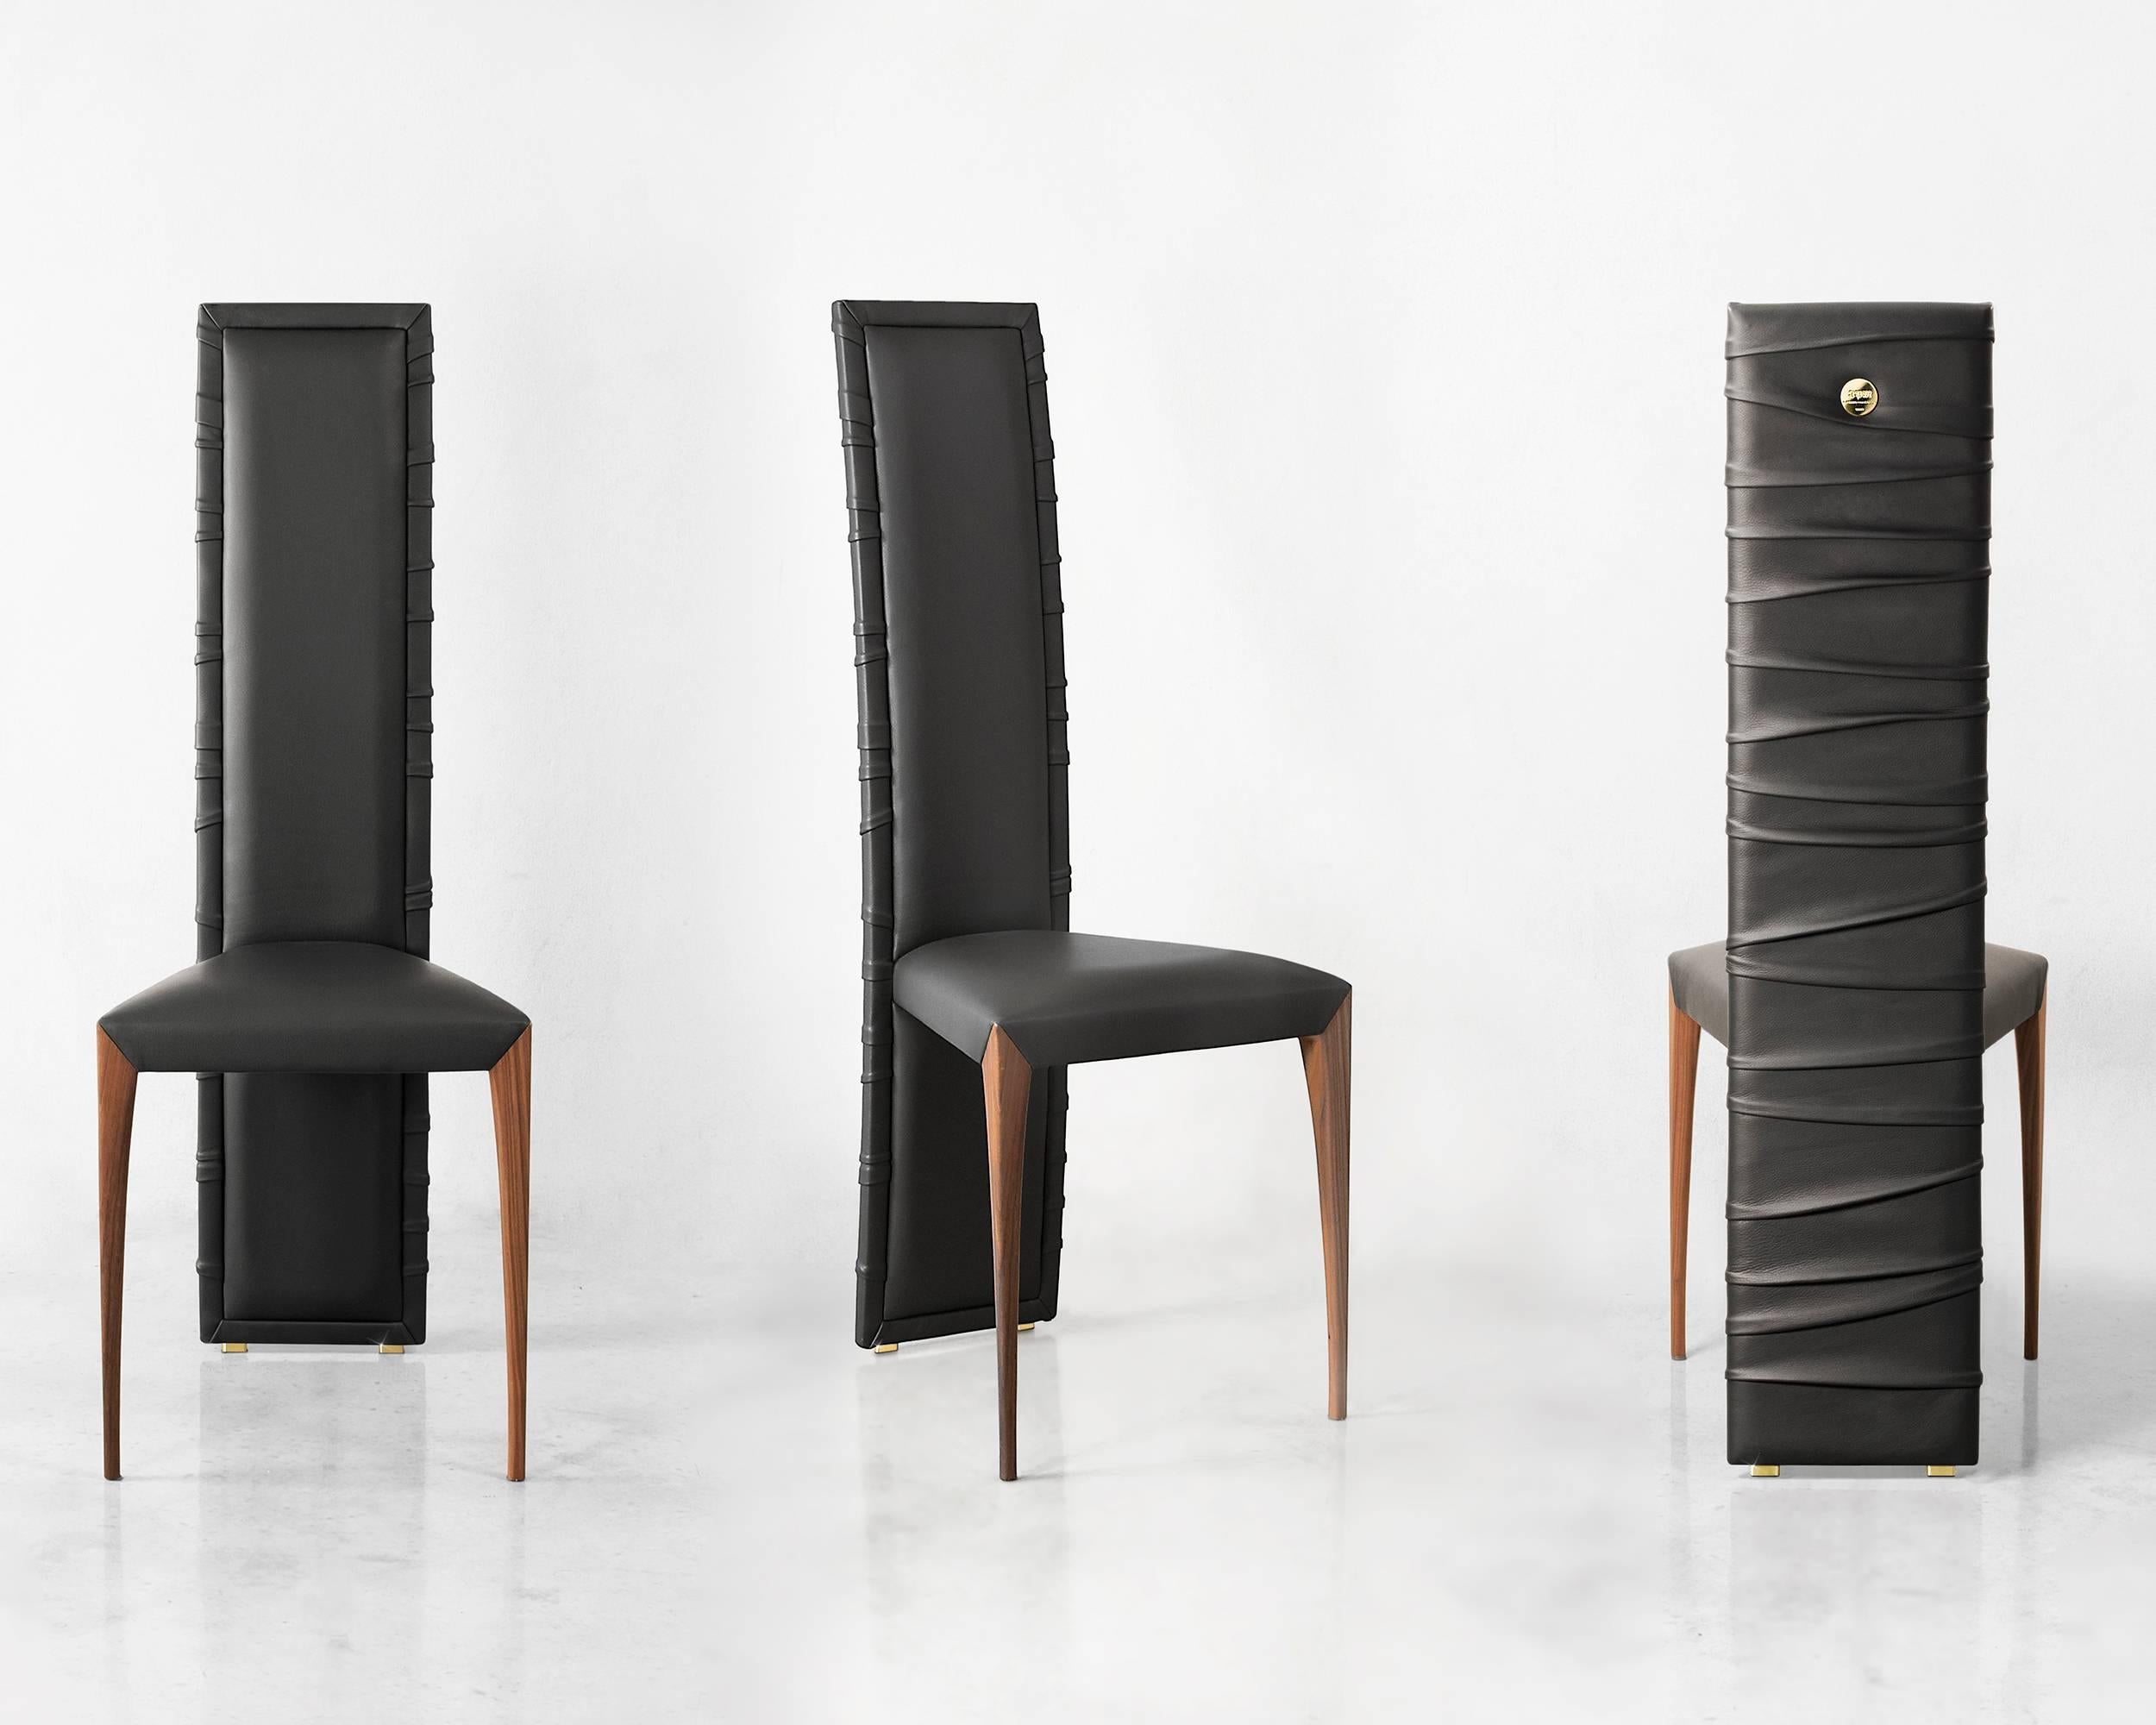 Sinuous folds envelop the elegant structure of Il Pezzo 7 Chair. Expertly upholstered in high- quality leather or velvet by master craftsmen, it boasts a rich, soft backrest, wrapped in its graceful folds. The seat features a solid wood base with a